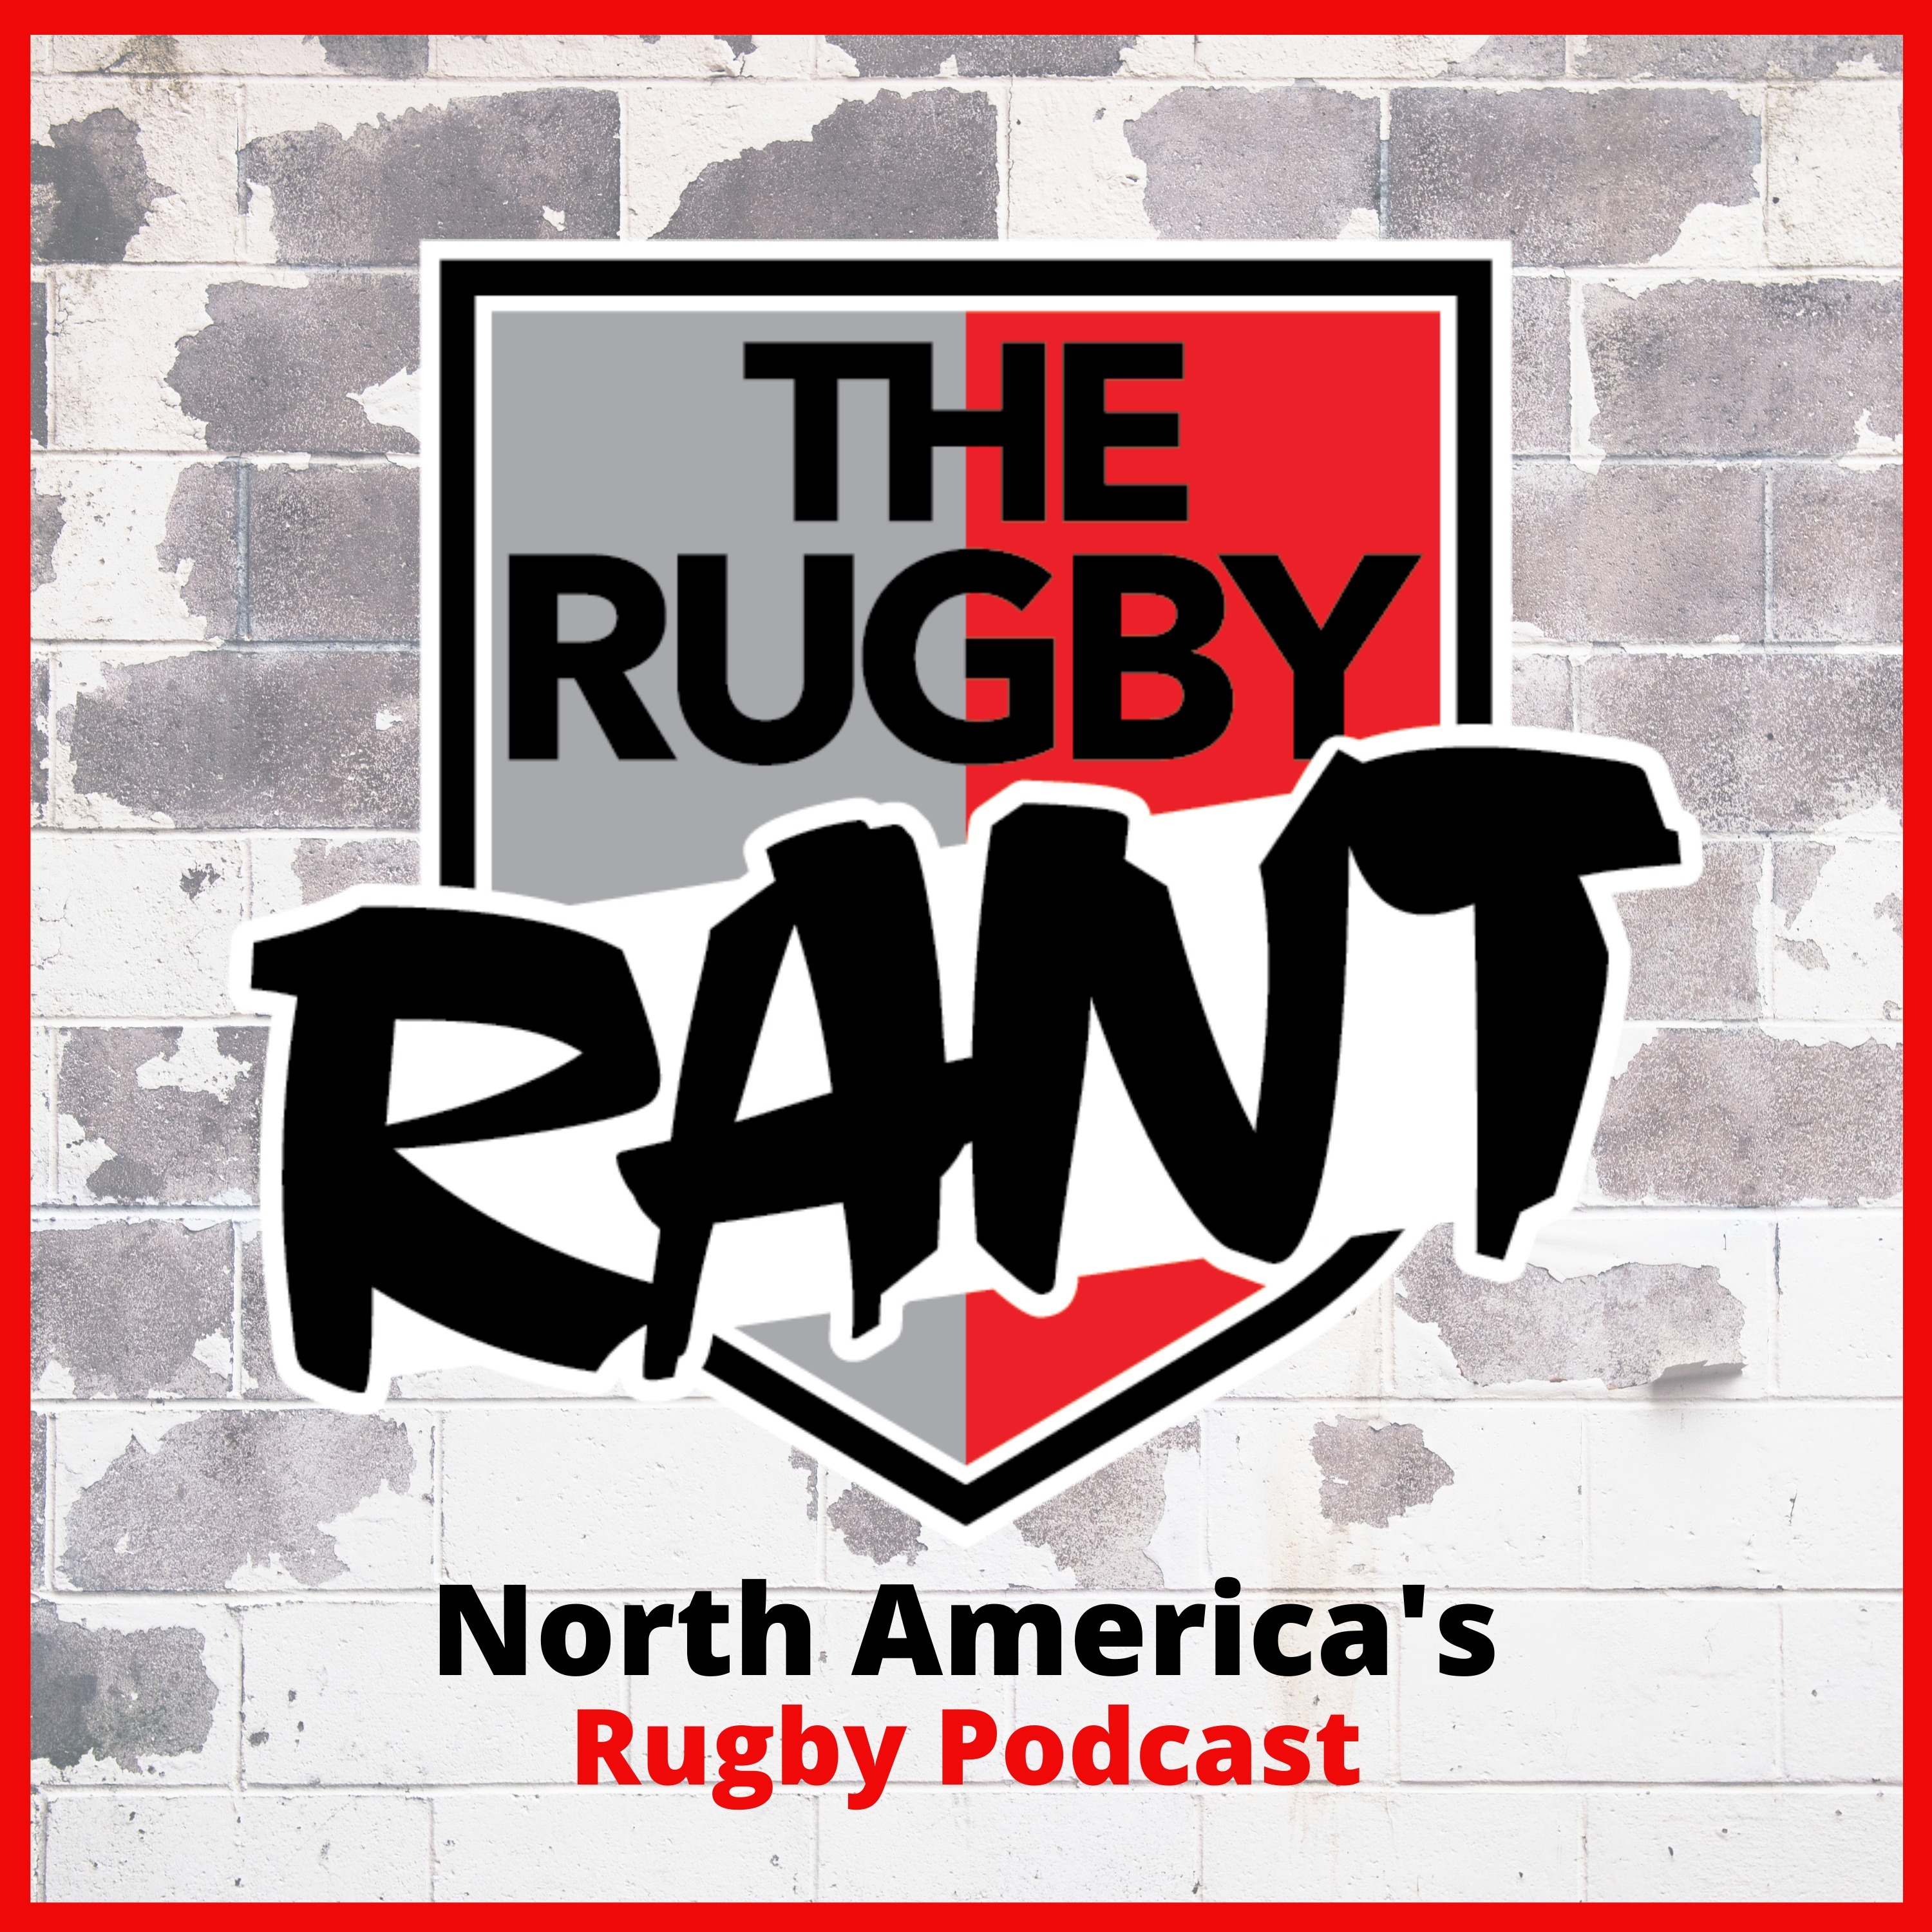 The Rugby Rant - Episode 101